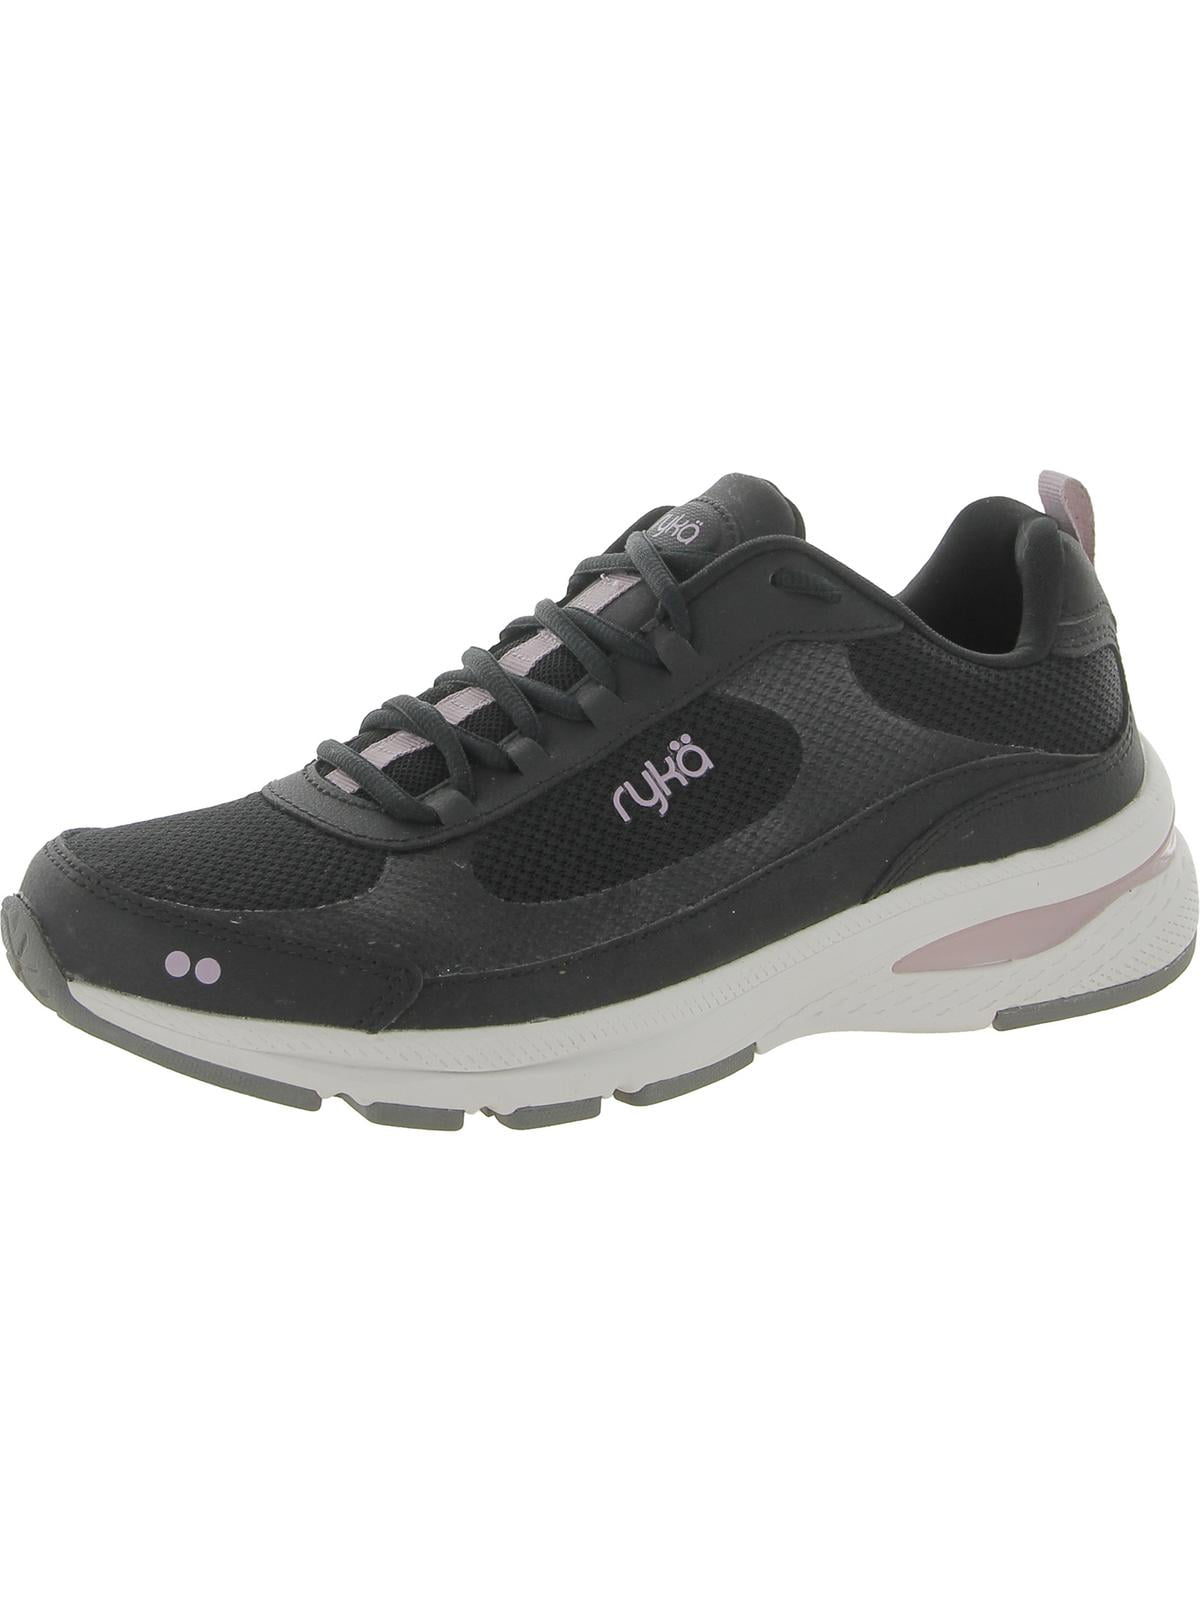 Ryka Womens Brave Leather Trim Fitness Athletic and Training Shoes ...